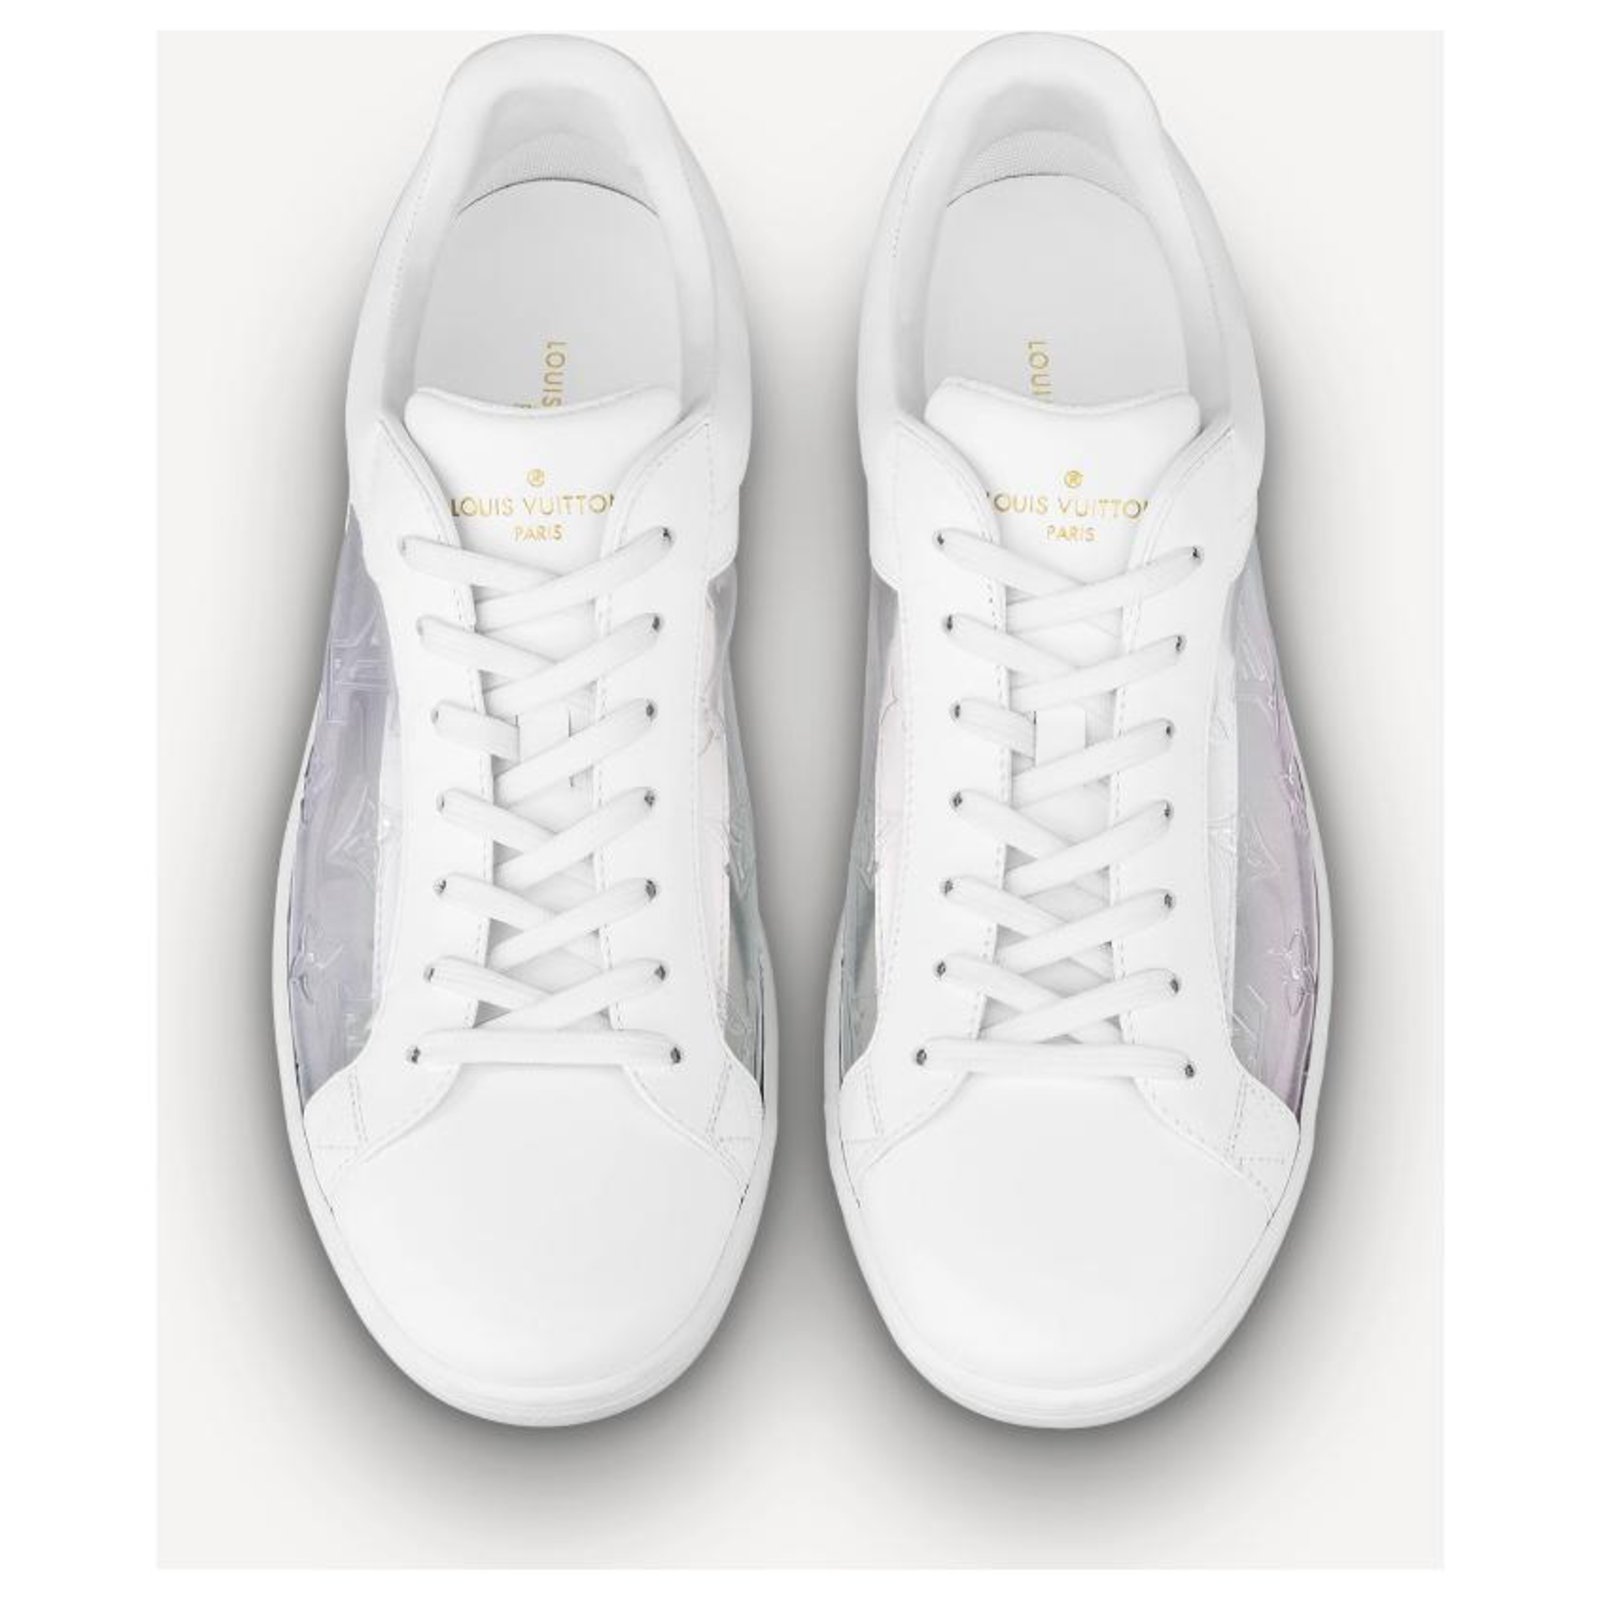 Luxembourg Sneaker - For Sale on 1stDibs  louis vuitton luxembourg  sneaker, louis vuitton luxembourg sneaker white, luxembourg louis vuitton  sneakers